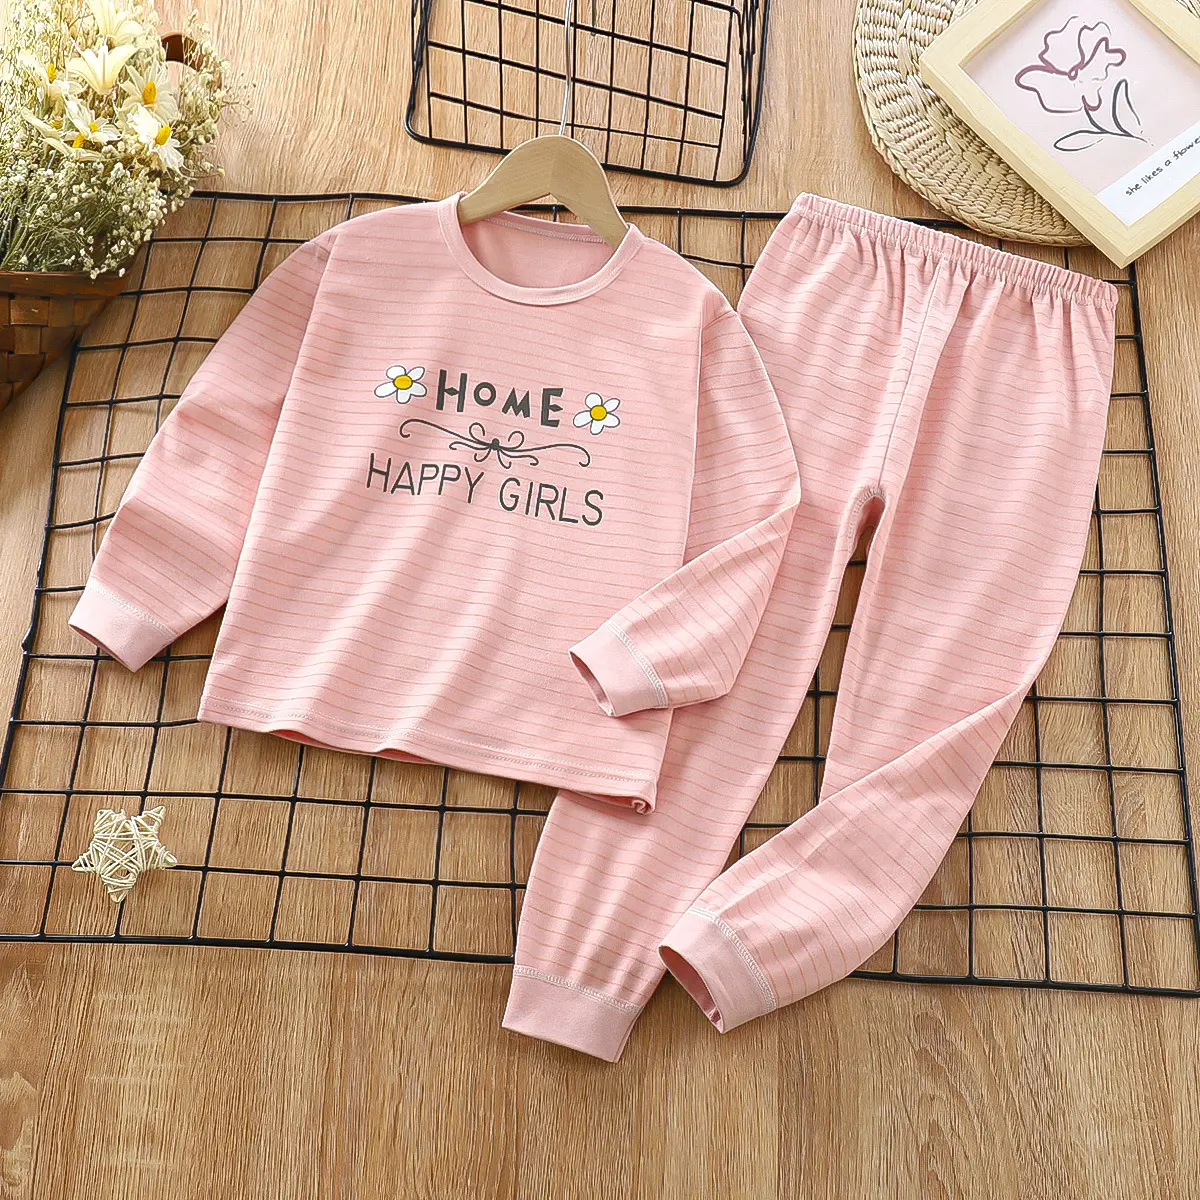 Hongwin Wholesale Hot Sale Unisex Kids Clothes Baby Boy Summer Soft Organic Cotton Short Sleeves 2 Pieces Baby Pajama Set